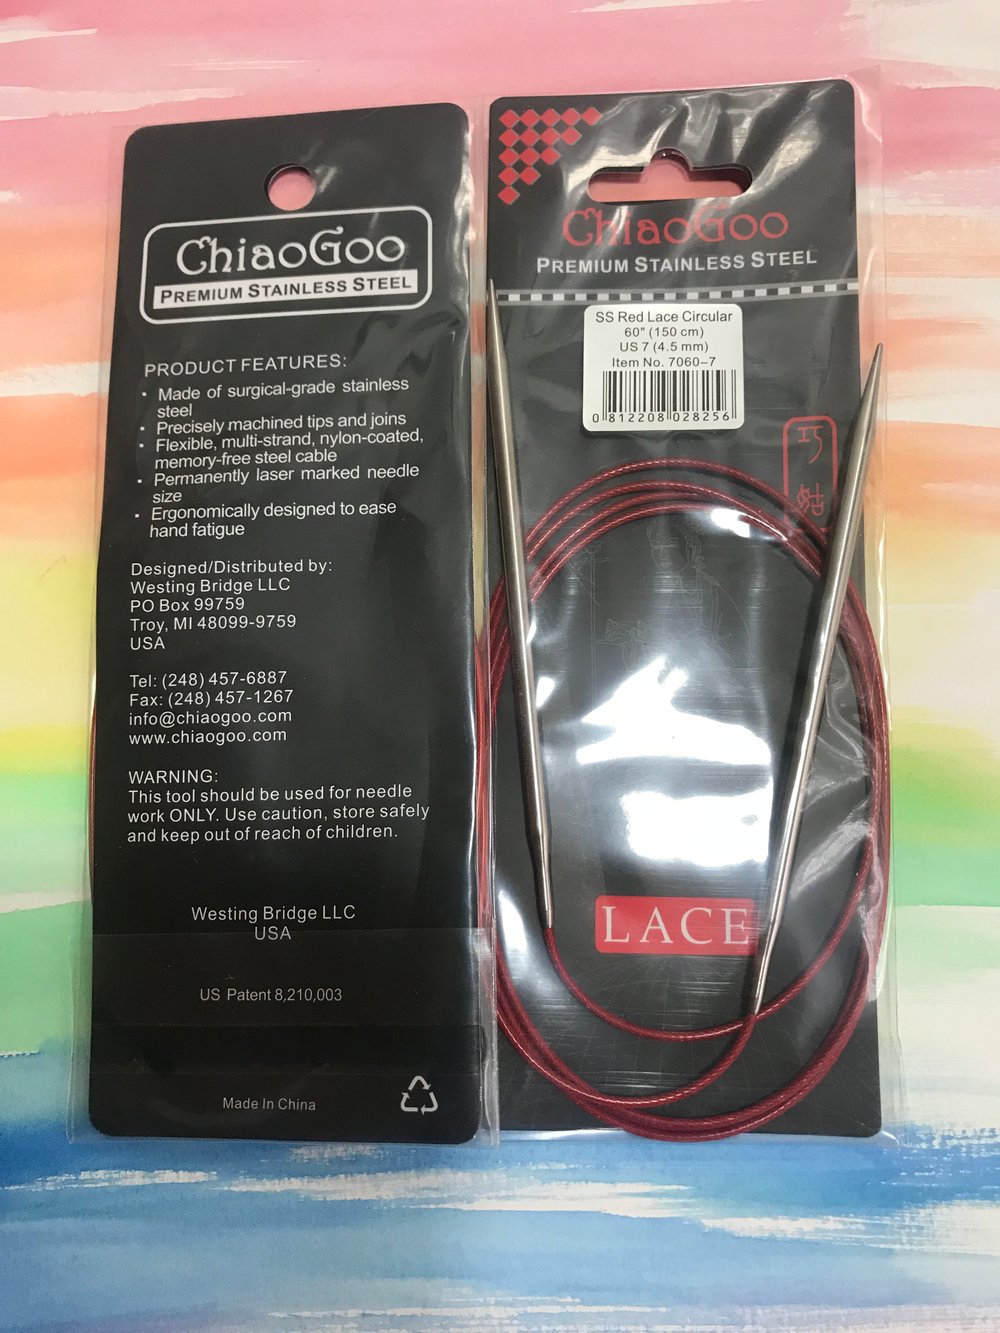 60 in - ChiaoGoo SS RED (lace) Circular Needles